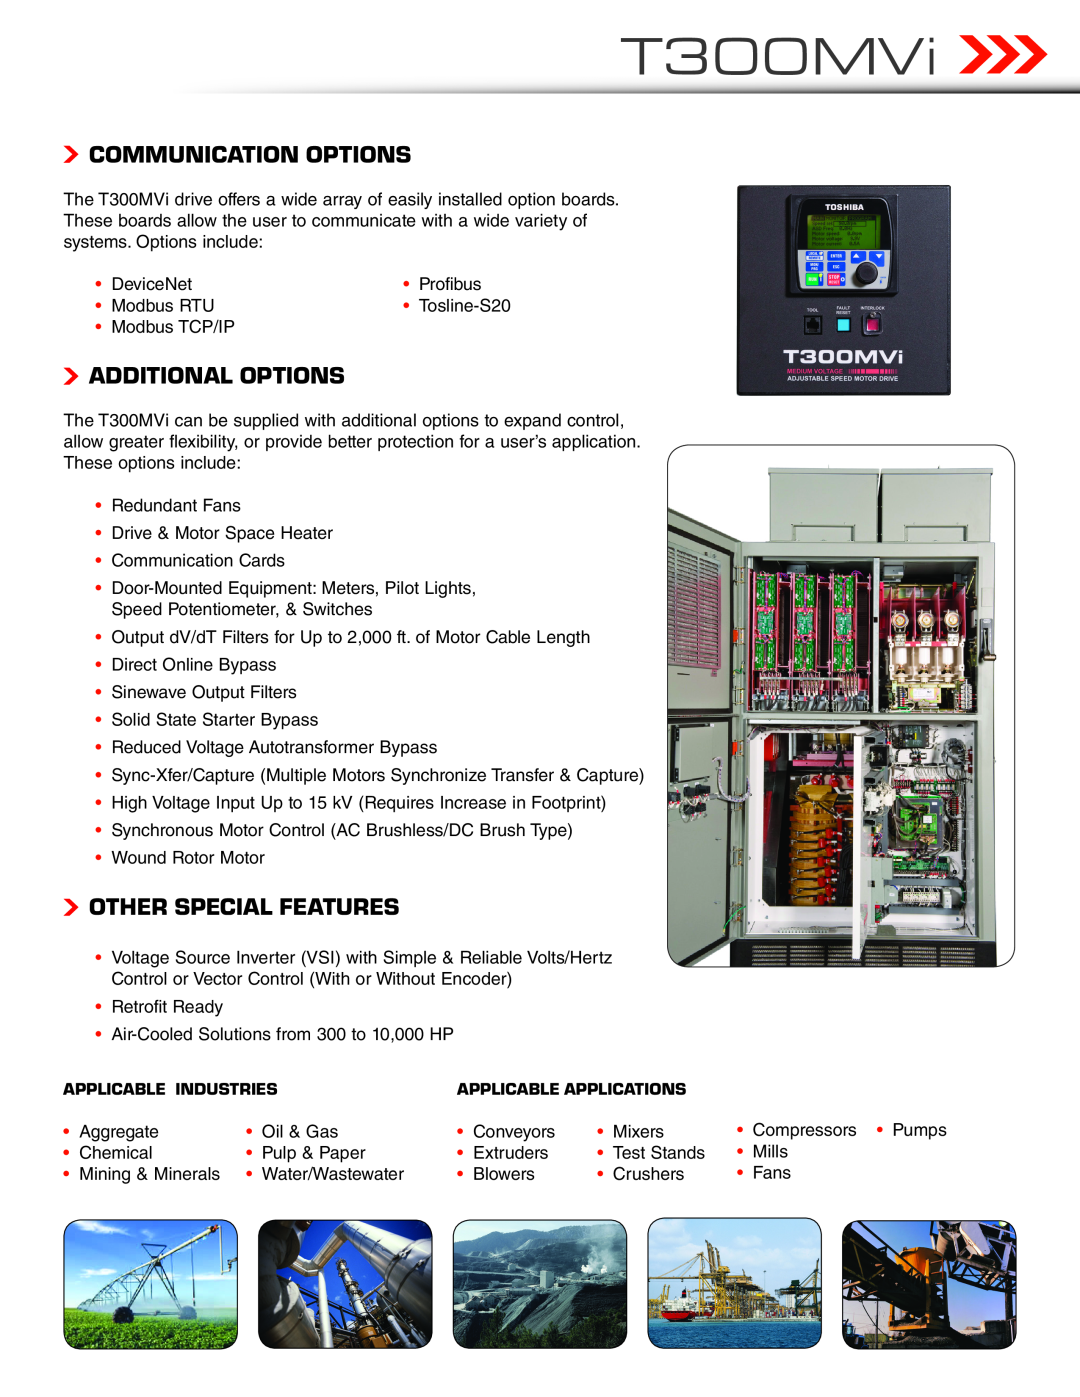 Toshiba T300MVi manual Communication Options, Additional Options, Other Special Features, DeviceNet, Profibus, Modbus RTU 